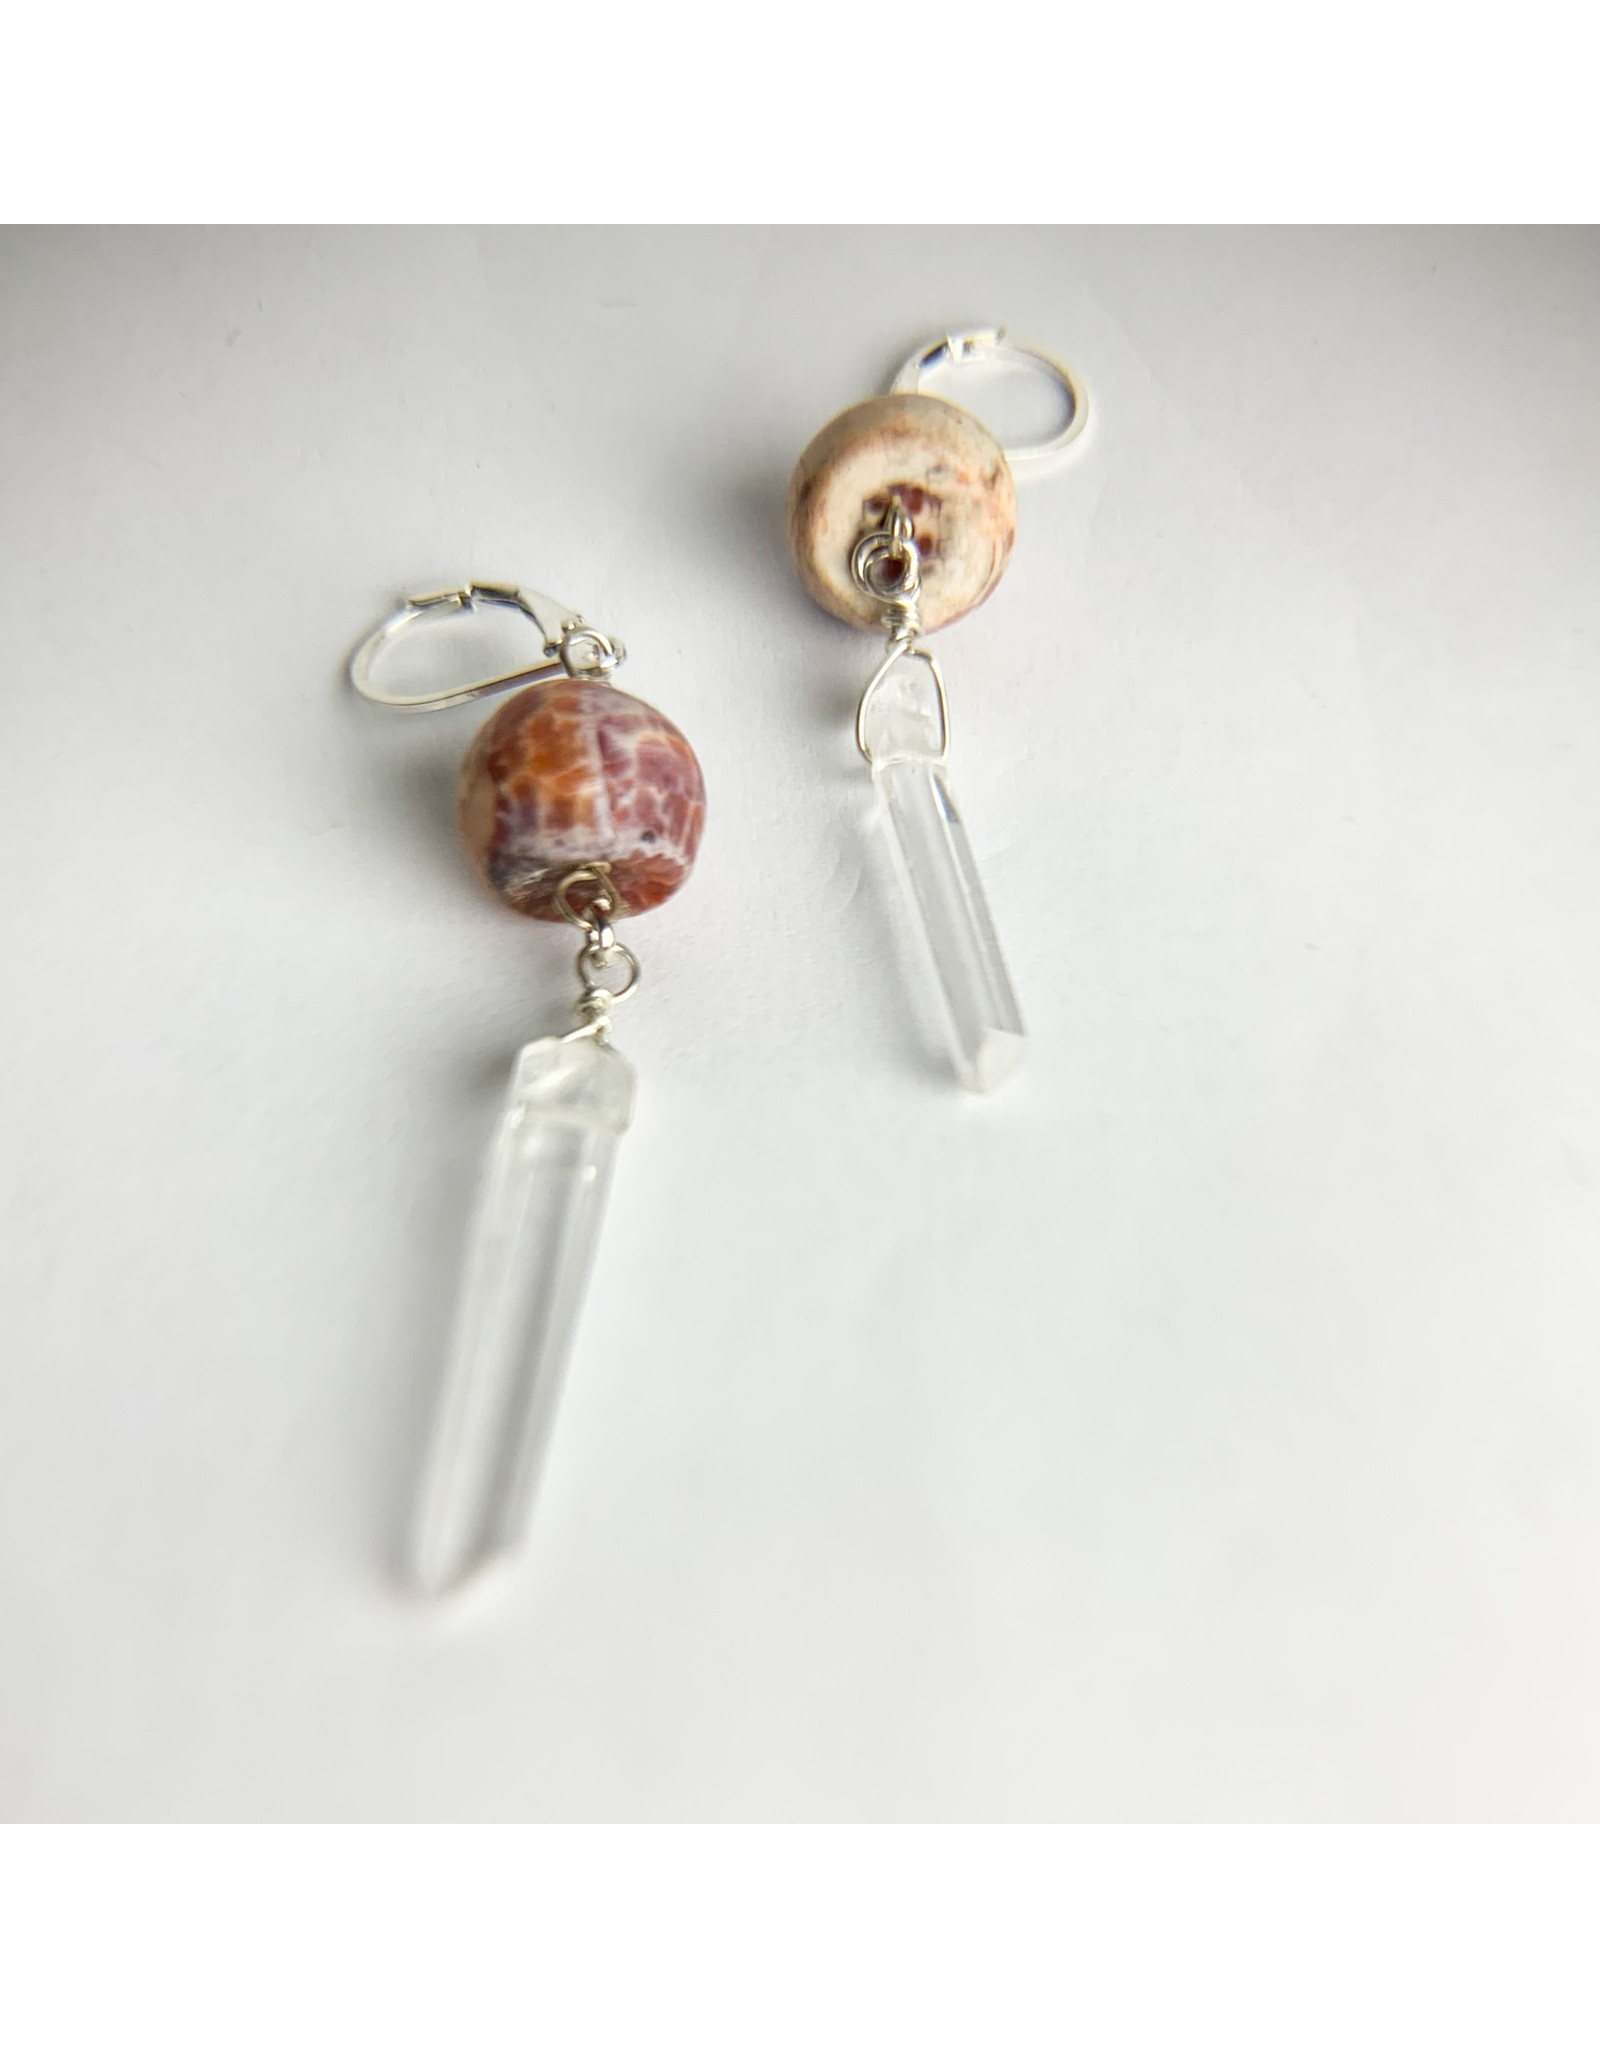 Fire Agate and Quartz Earrings Consignment